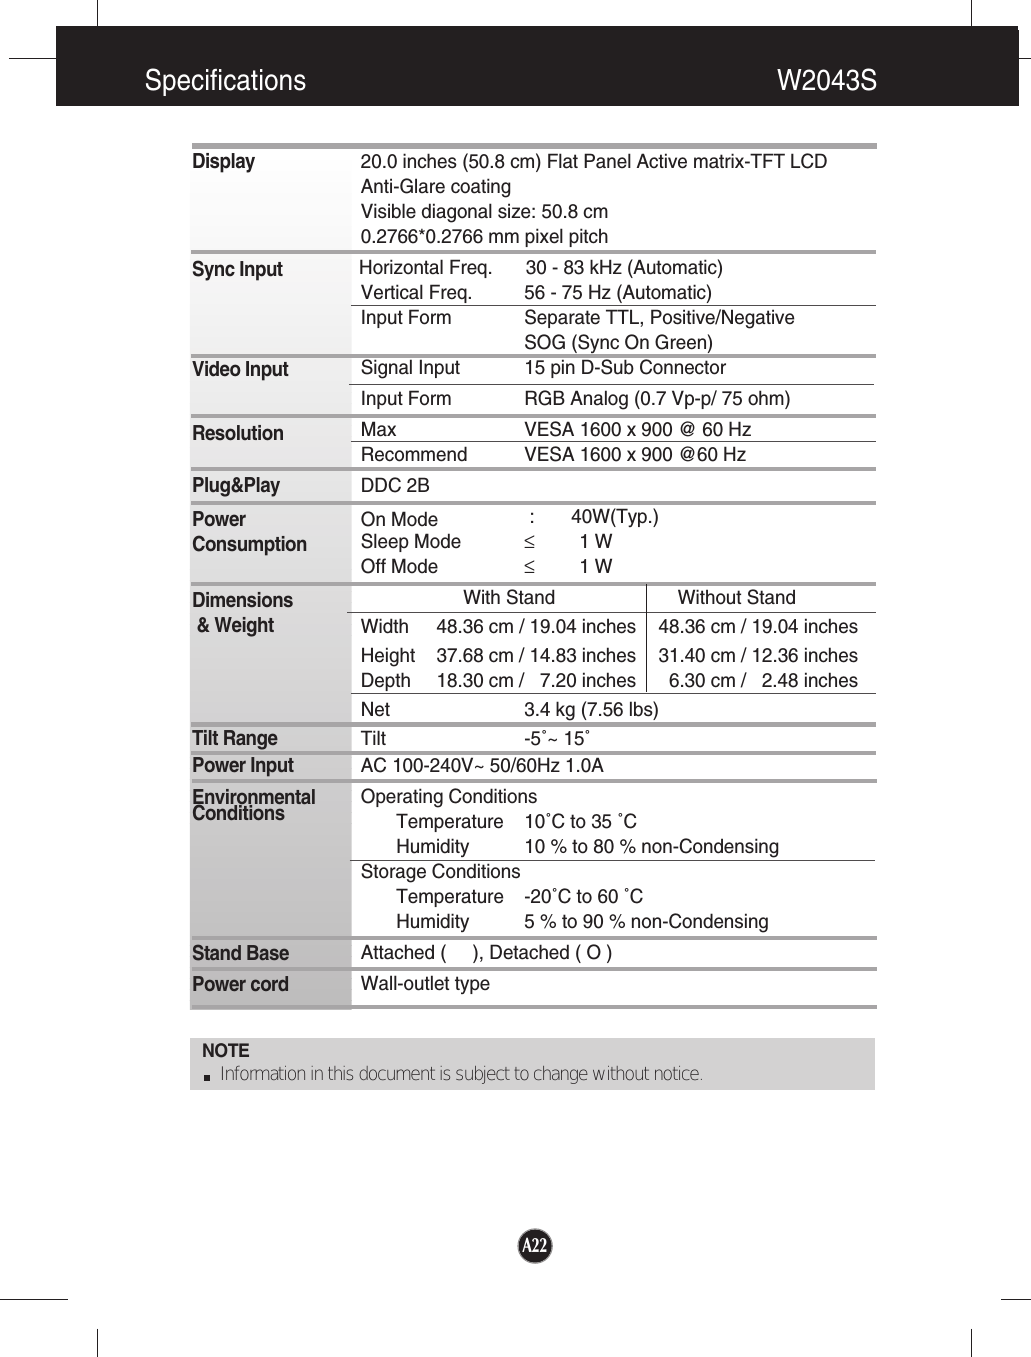 A22Specifications W2043SNOTEInformation in this document is subject to change without notice.DisplaySync InputVideo InputResolutionPlug&amp;PlayPowerConsumptionDimensions&amp; WeightTilt RangePower InputEnvironmentalConditionsStand BasePower cord 20.0 inches (50.8 cm) Flat Panel Active matrix-TFT LCD Anti-Glare coating Visible diagonal size: 50.8 cm0.2766*0.2766 mm pixel pitchHorizontal Freq. 30 - 83 kHz (Automatic)Vertical Freq. 56 - 75 Hz (Automatic)Input Form Separate TTL, Positive/NegativeSOG (Sync On Green) Signal Input 15 pin D-Sub ConnectorInput Form RGB Analog (0.7 Vp-p/ 75 ohm)Max VESA 1600 x 900 @ 60 HzRecommend VESA 1600 x 900 @60 HzDDC 2BOn Mode : 40W(Typ.)Sleep Mode ≤1 WOff Mode ≤1 WWith Stand Without StandWidth 48.36 cm / 19.04 inches 48.36 cm / 19.04 inchesHeight 37.68 cm / 14.83 inches 31.40 cm / 12.36 inches Depth 18.30 cm /   7.20 inches 6.30 cm /   2.48 inchesNet 3.4 kg (7.56 lbs)Tilt -5˚~ 15˚AC 100-240V~ 50/60Hz 1.0AOperating ConditionsTemperature 10˚C to 35 ˚CHumidity 10 % to 80 % non-CondensingStorage ConditionsTemperature -20˚C to 60 ˚CHumidity 5 % to 90 % non-CondensingAttached (     ), Detached ( O )Wall-outlet type